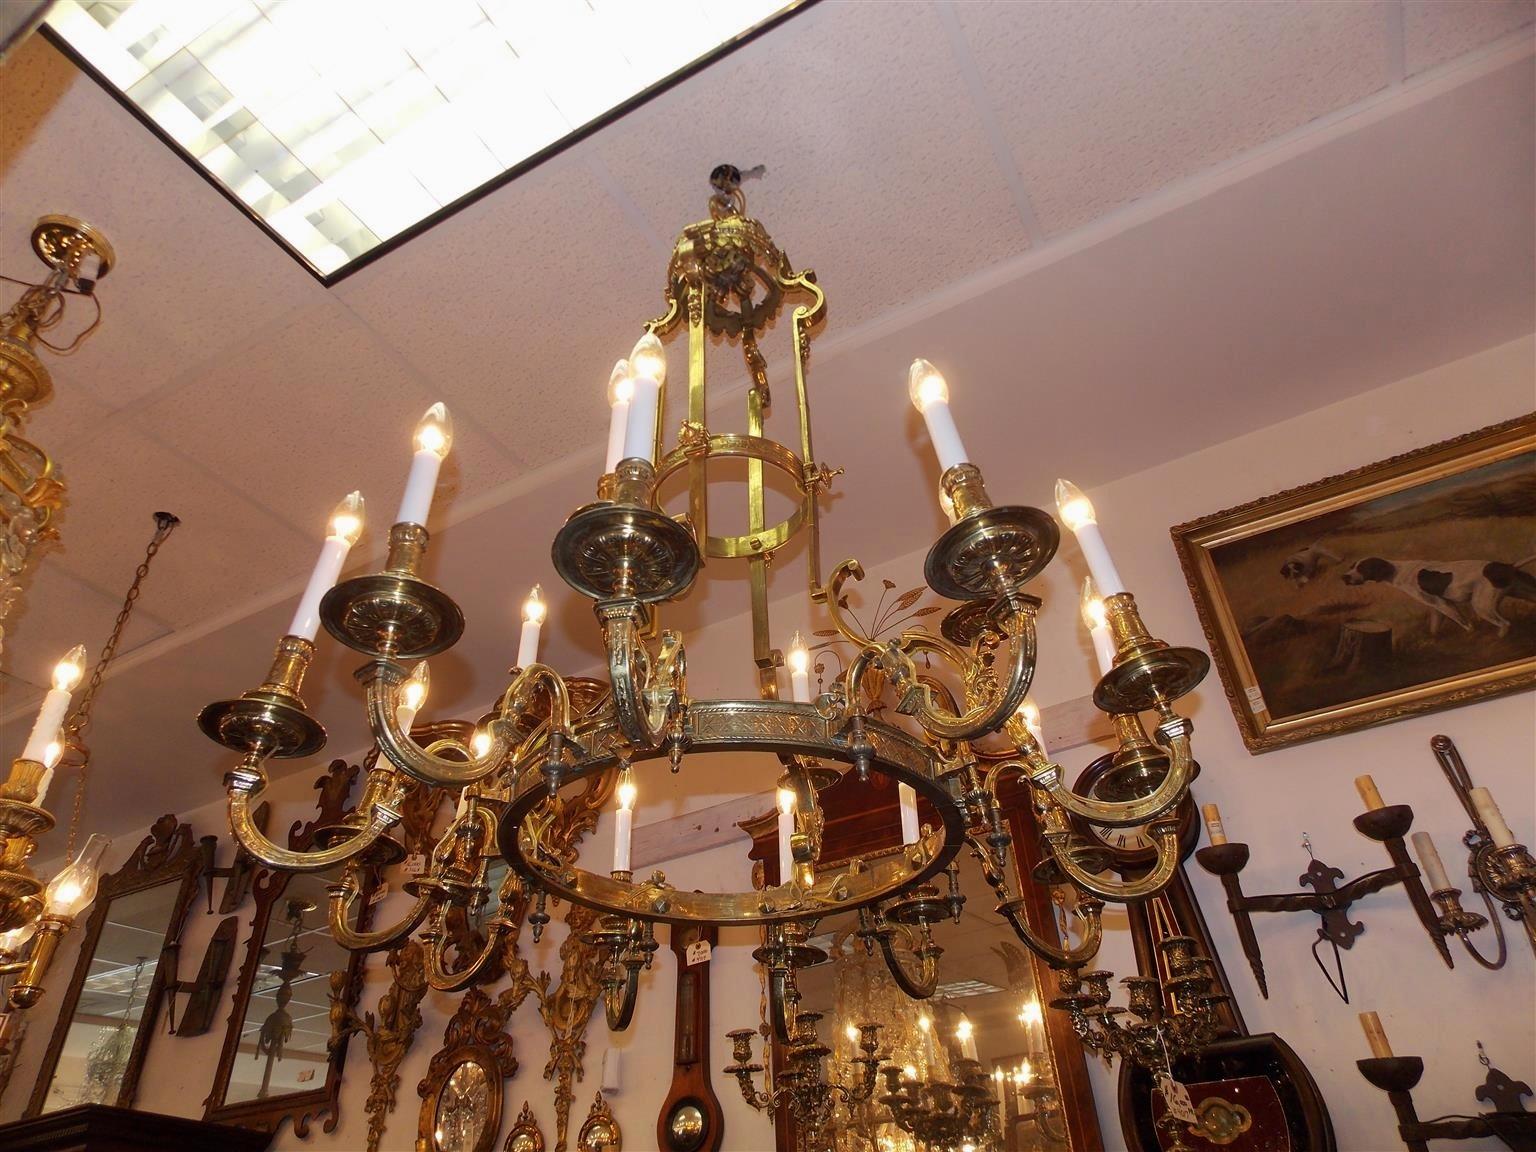 French bronze figural and foliage two-tiered elongated sixteen-light chandelier with four pulley system under dome finial. Chandelier was originally candle powered and has been electrified. Early 19th century.